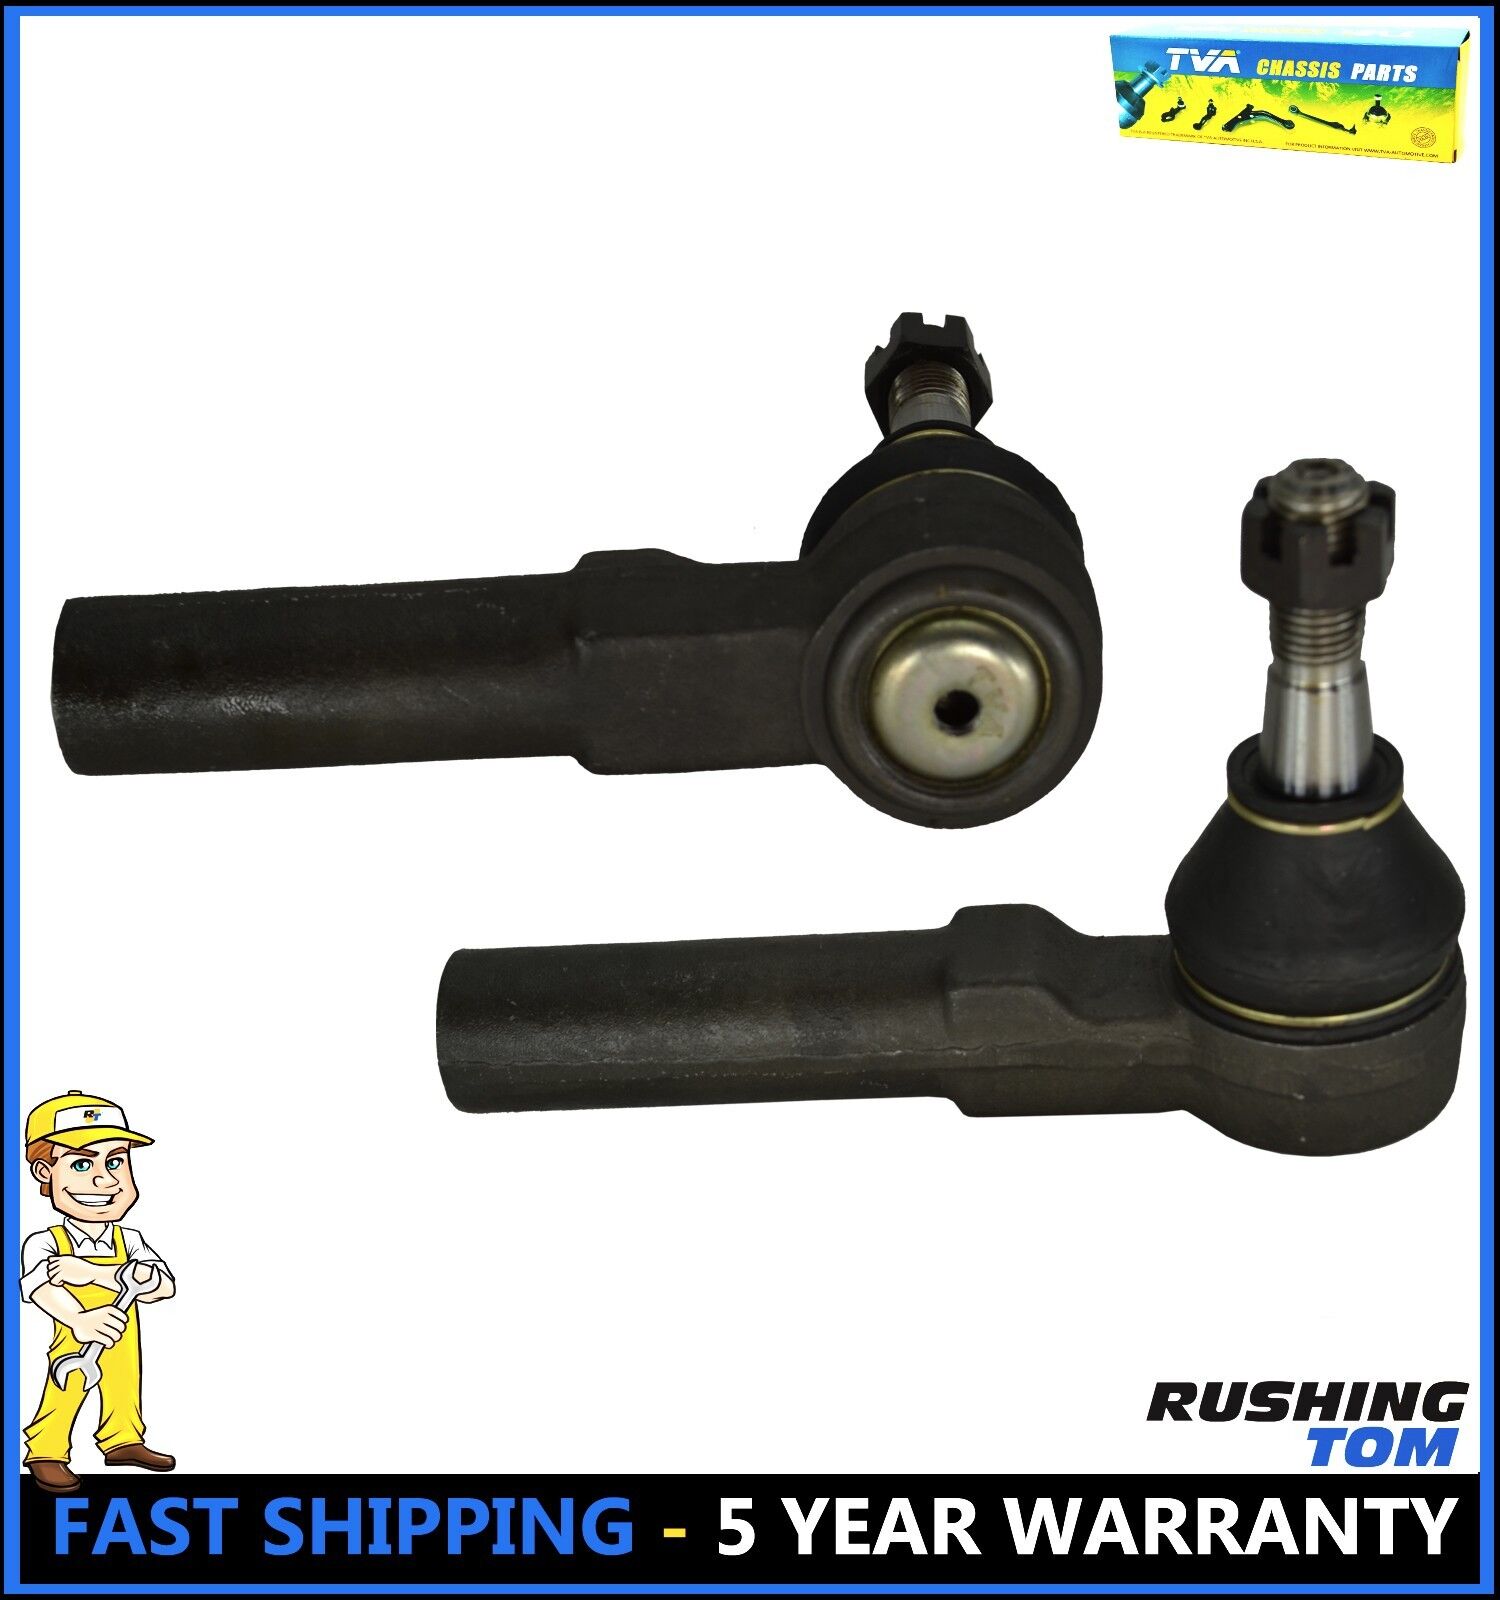 2 Front Outer Tie Rod Left & Right Fits Chevrolet Impala Grand Prix Monte Carlo